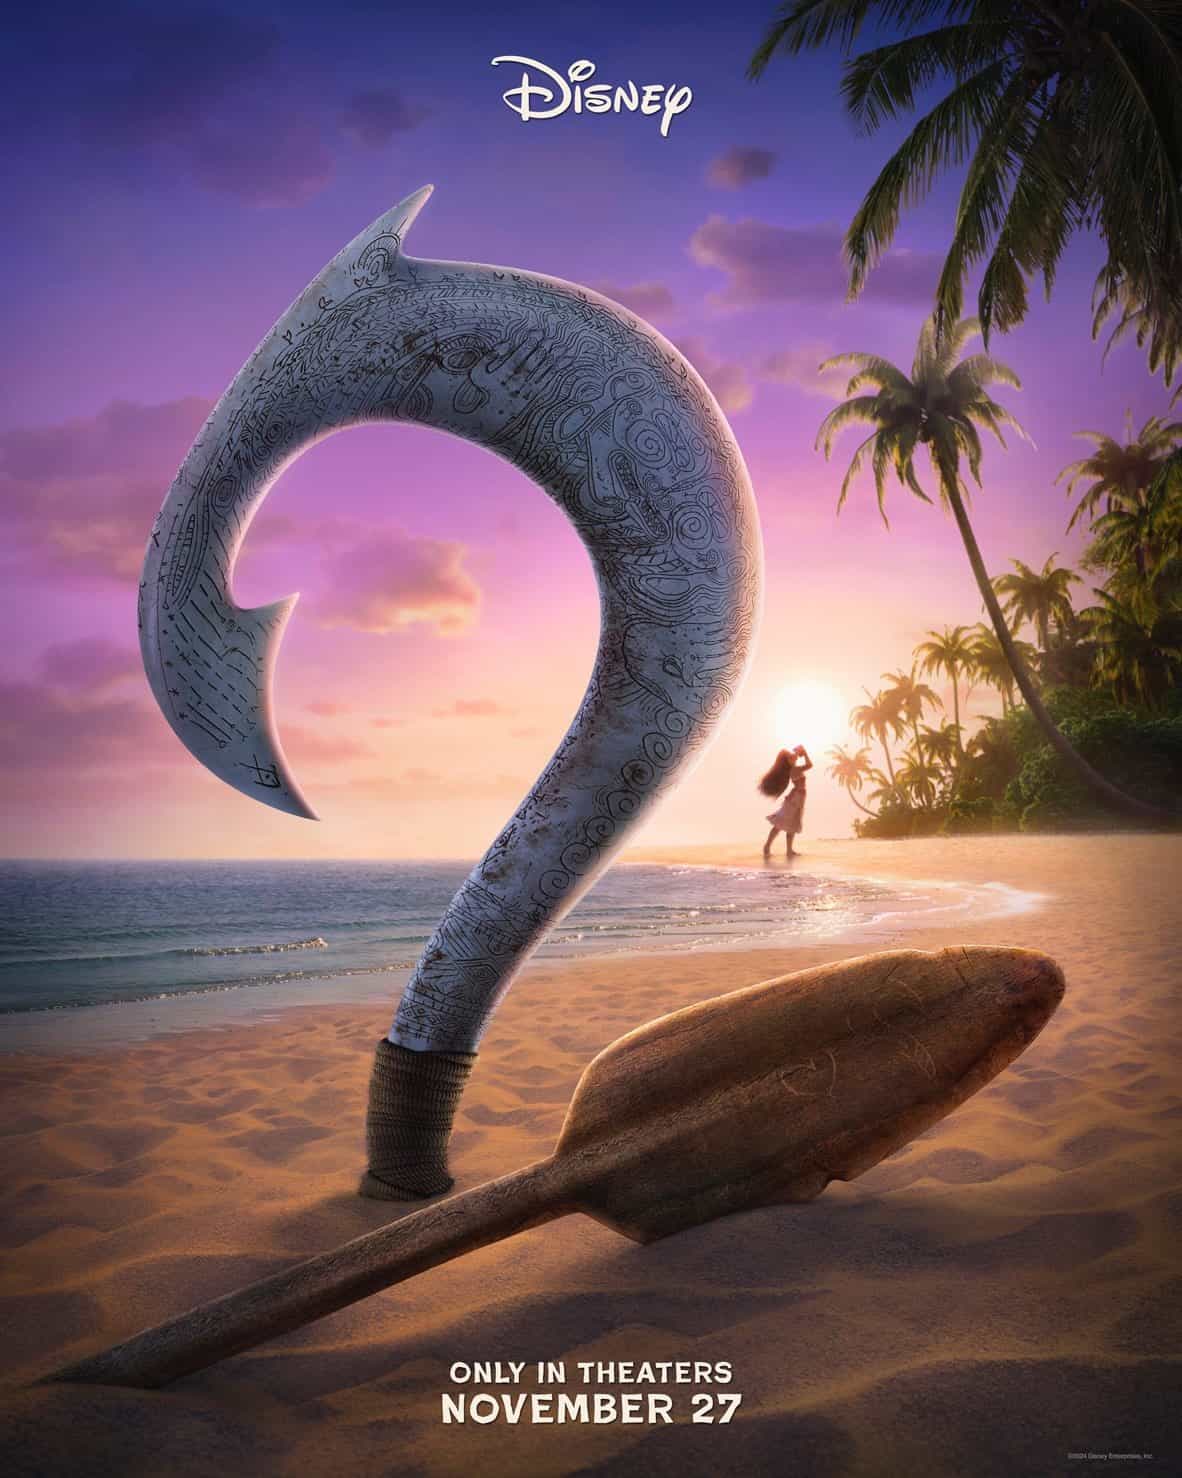 Check out the new trailer for upcoming movie Moana 2 which stars AuliAuli'ii Cravalho and Dwayne Johnson - movie UK release date 27th November 2024 #moana2